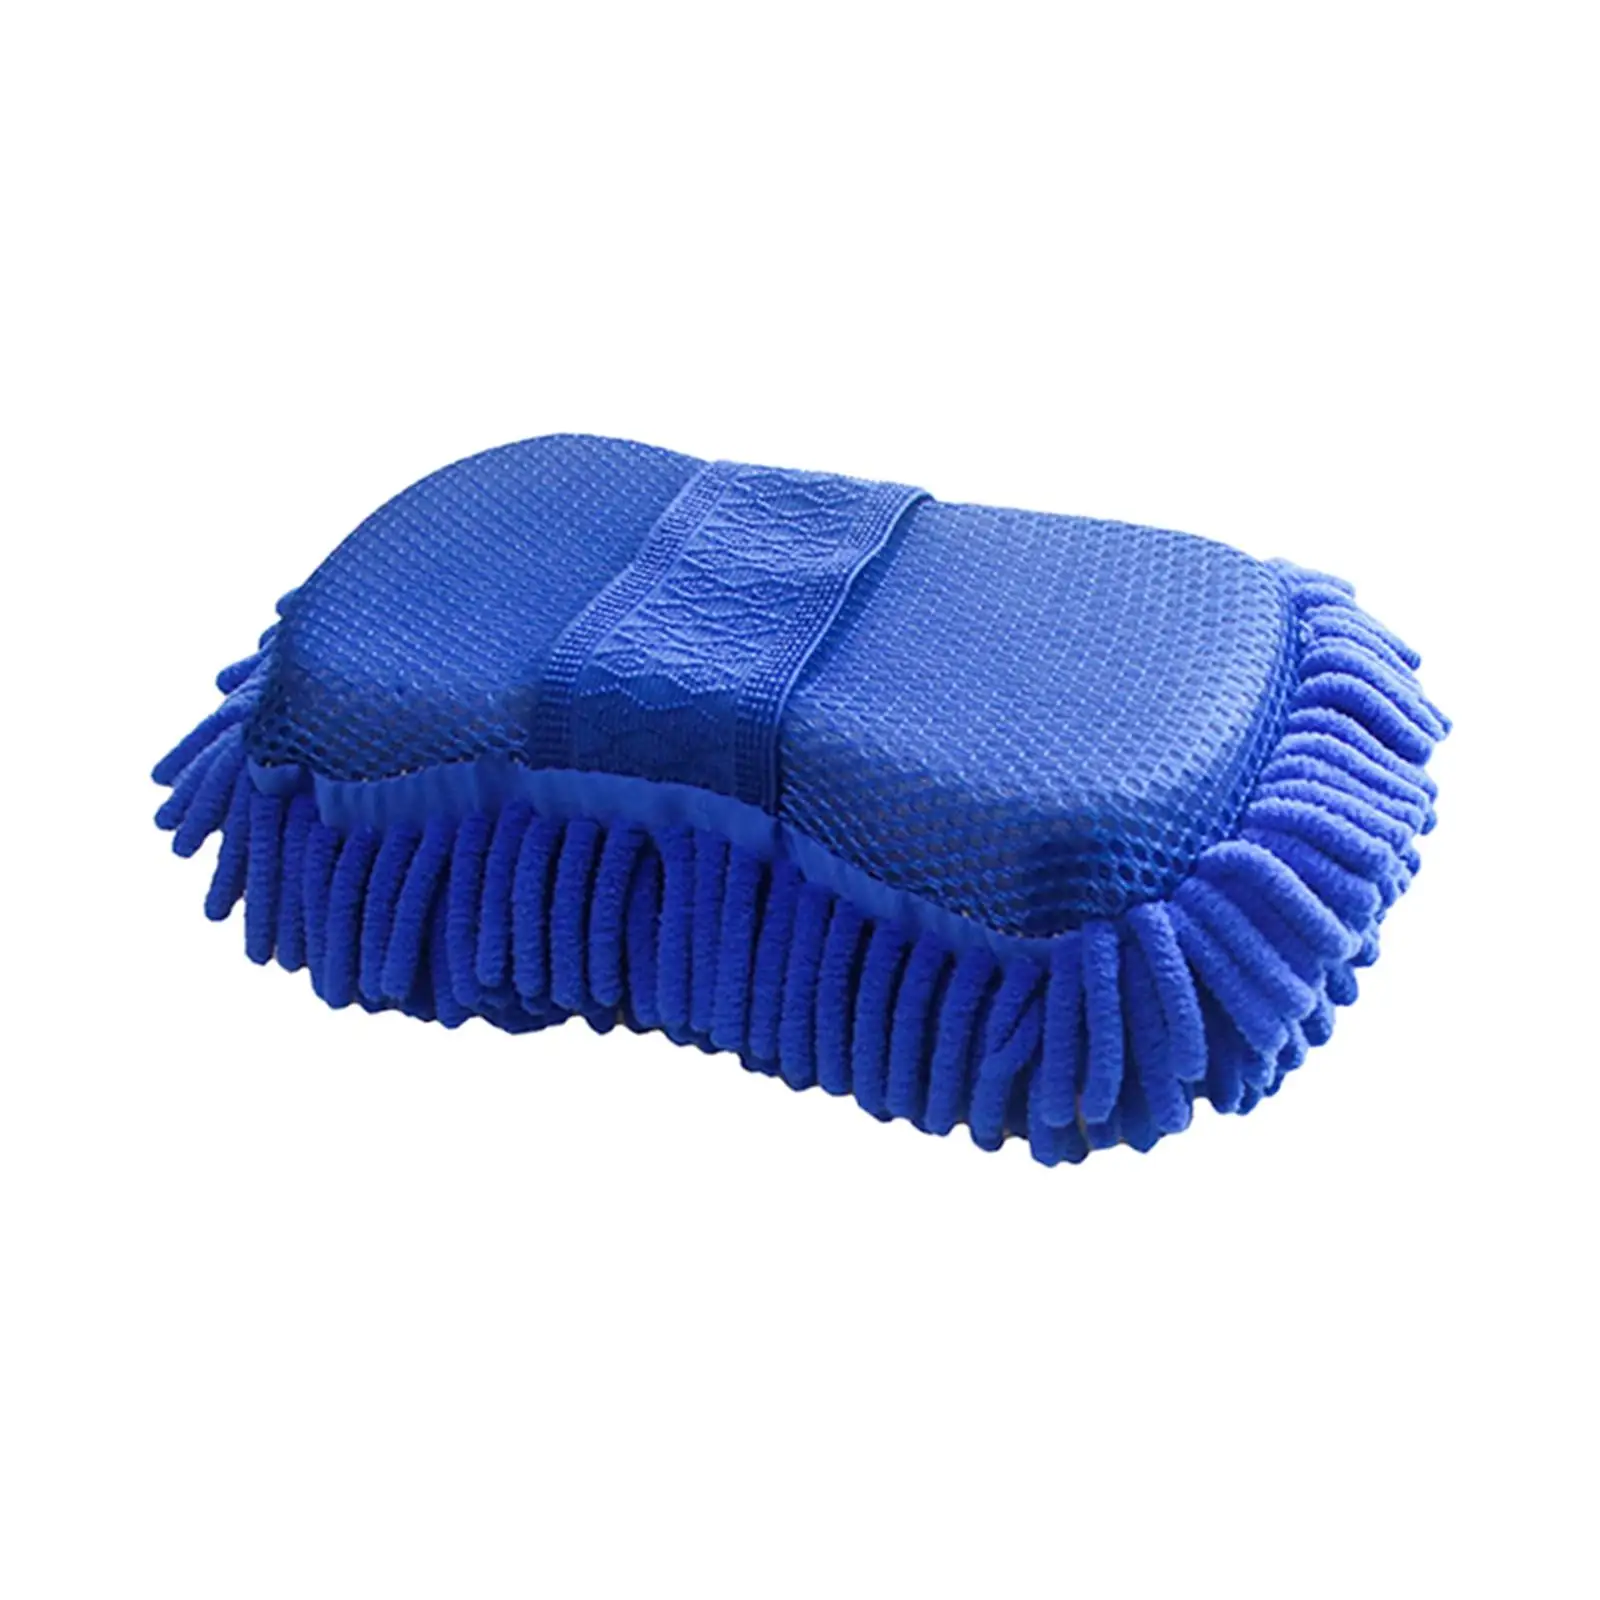 Car Washing Soft Sponge Cleaning and Dusting Machine Washed and Reused